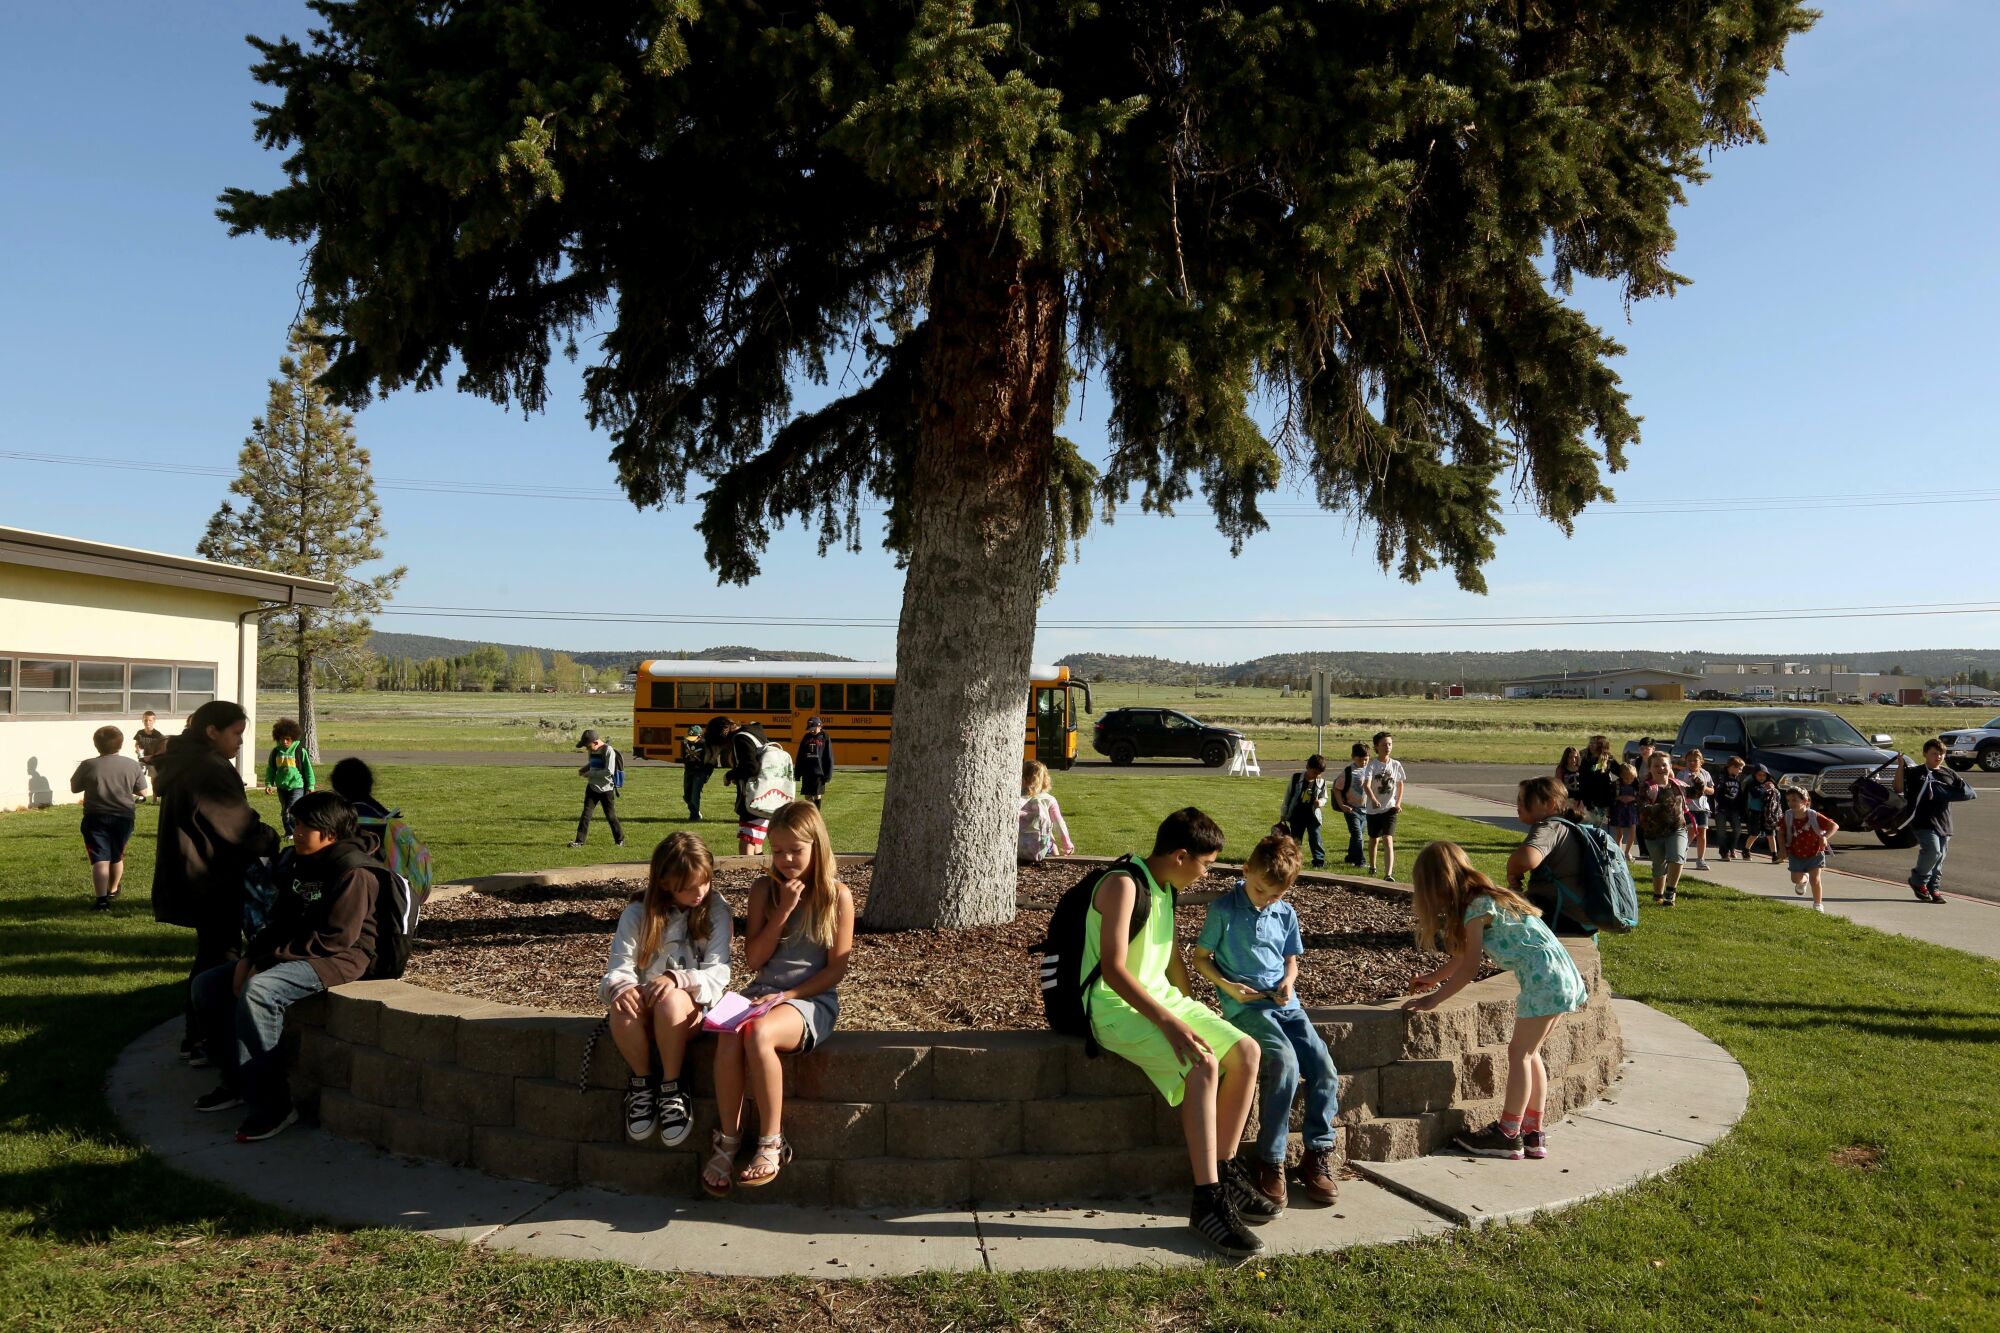 Students sit under a tree as others arrive at the start of school at Alturas Elementary.